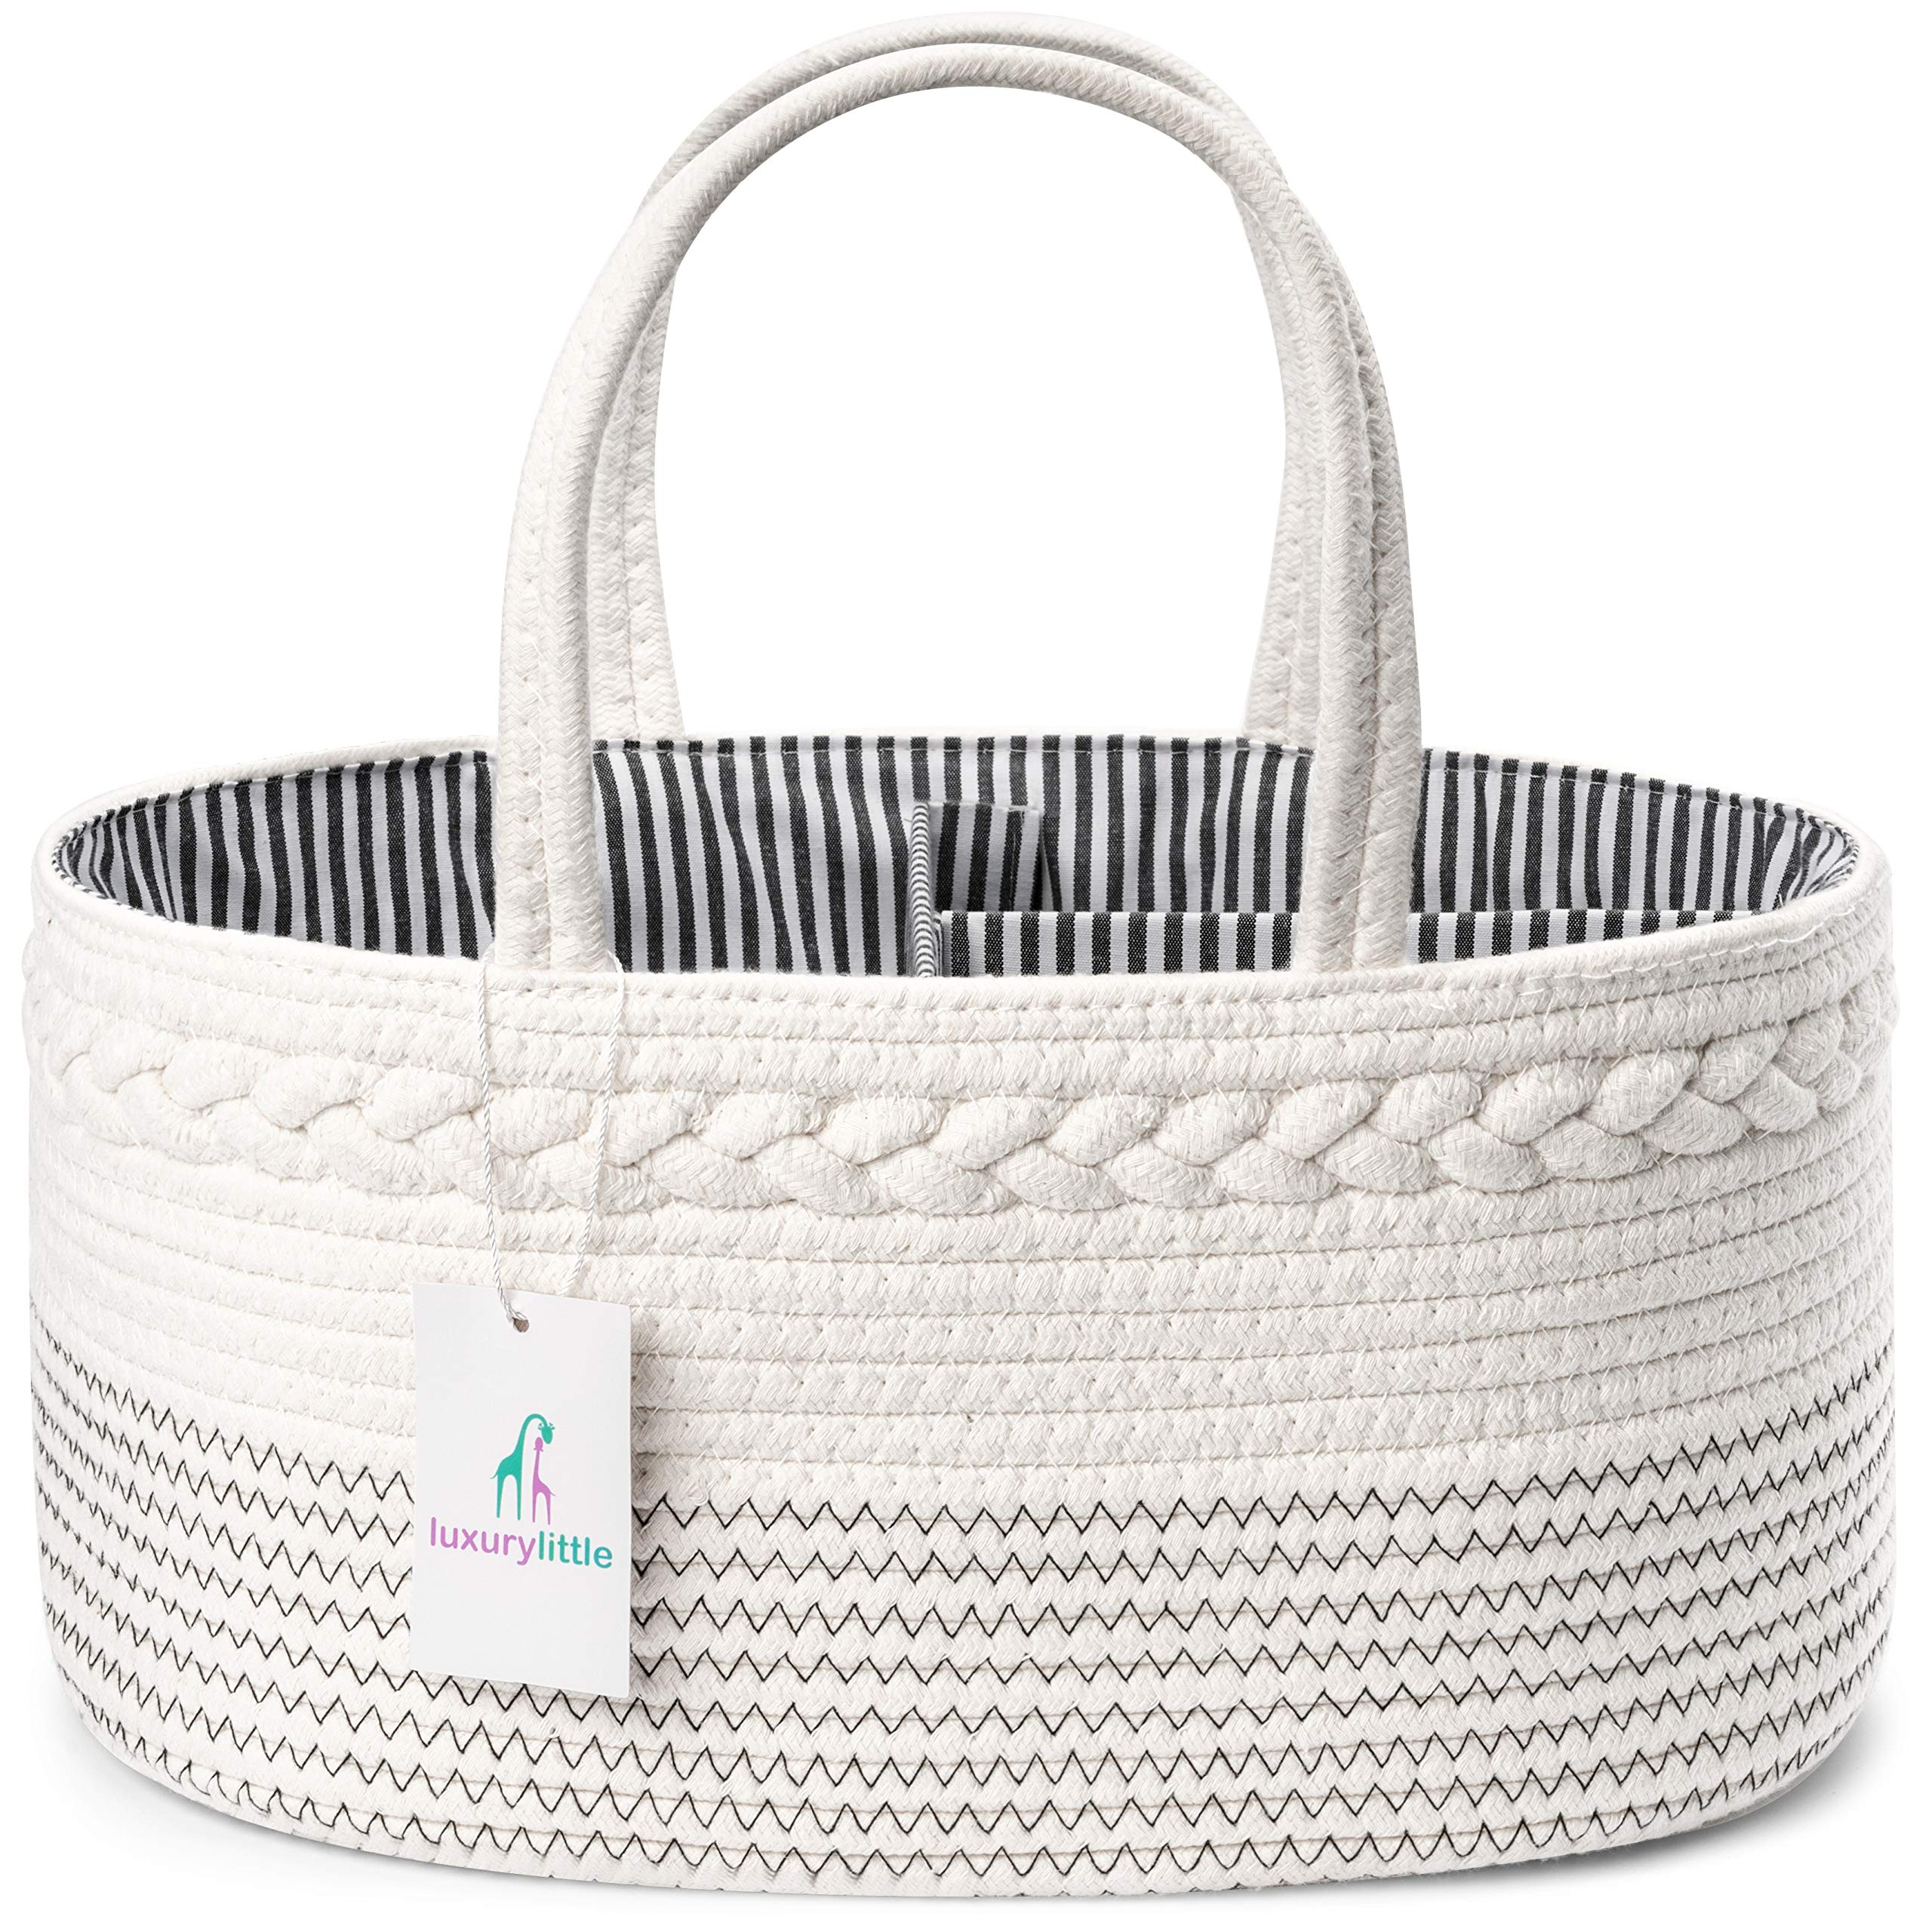 Luxury Little Baby Nappy Caddy Organiser — Extra Large Cotton Rope Diaper Changing Bag with Removable Inserts — The Perfect Basket for New Mums & Parents